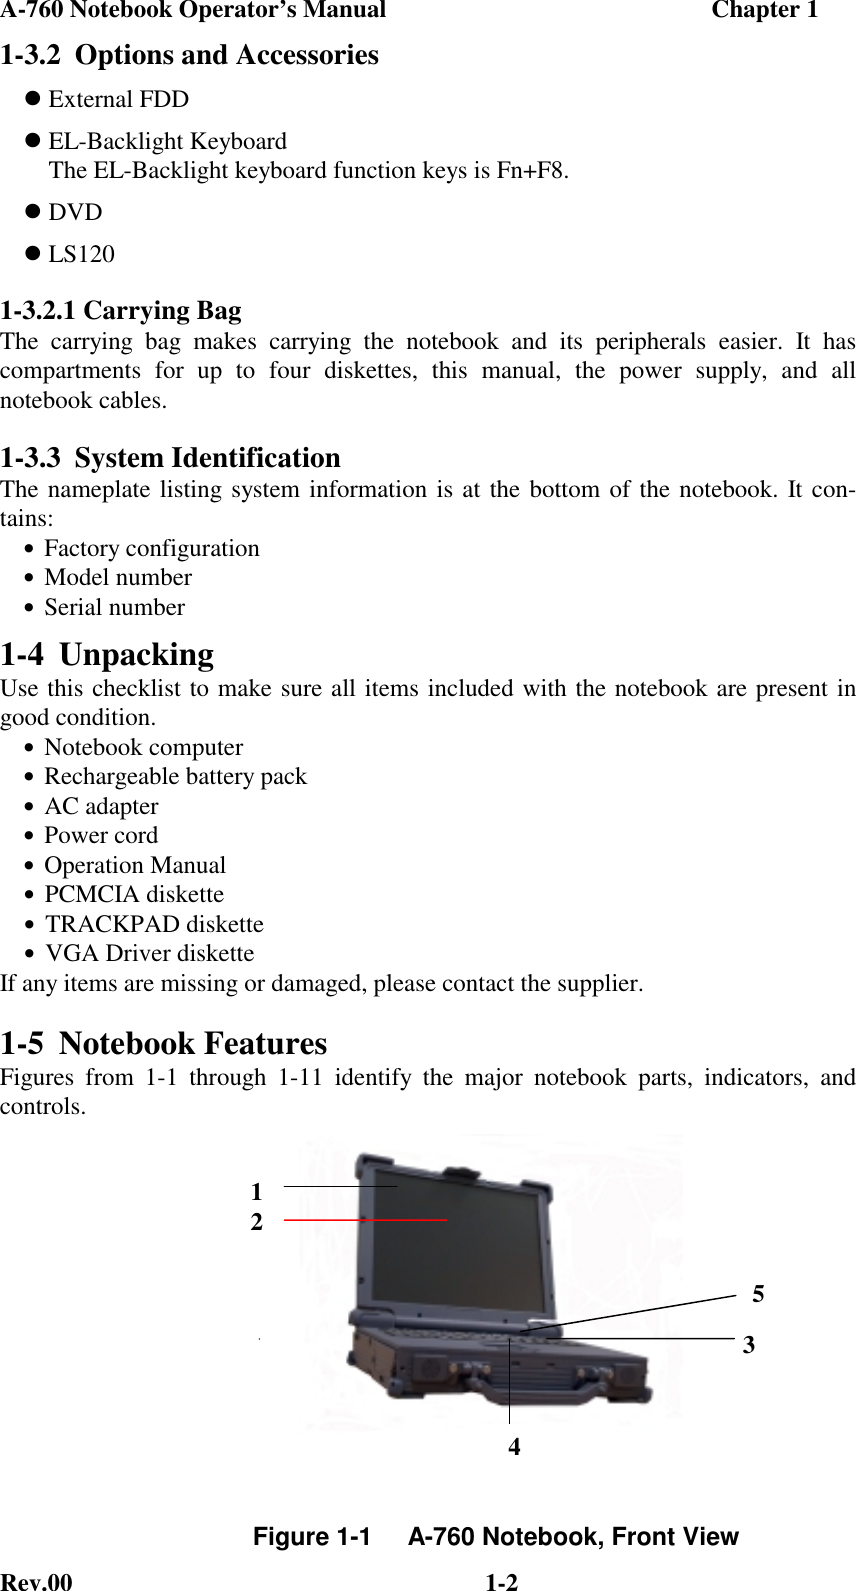 A-760 Notebook Operator’s Manual                                                    Chapter 1Rev.00 1-21-3.2 Options and Accessories External FDD EL-Backlight Keyboard    The EL-Backlight keyboard function keys is Fn+F8. DVD LS1201-3.2.1 Carrying BagThe carrying bag makes carrying the notebook and its peripherals easier. It hascompartments for up to four diskettes, this manual, the power supply, and allnotebook cables.1-3.3 System IdentificationThe nameplate listing system information is at the bottom of the notebook. It con-tains:•Factory configuration•Model number•Serial number1-4 UnpackingUse this checklist to make sure all items included with the notebook are present ingood condition.•Notebook computer•Rechargeable battery pack•AC adapter•Power cord•Operation Manual•PCMCIA diskette•TRACKPAD diskette•VGA Driver disketteIf any items are missing or damaged, please contact the supplier.1-5 Notebook FeaturesFigures from 1-1 through 1-11 identify the major notebook parts, indicators, andcontrols.Figure 1-1     A-760 Notebook, Front View12354